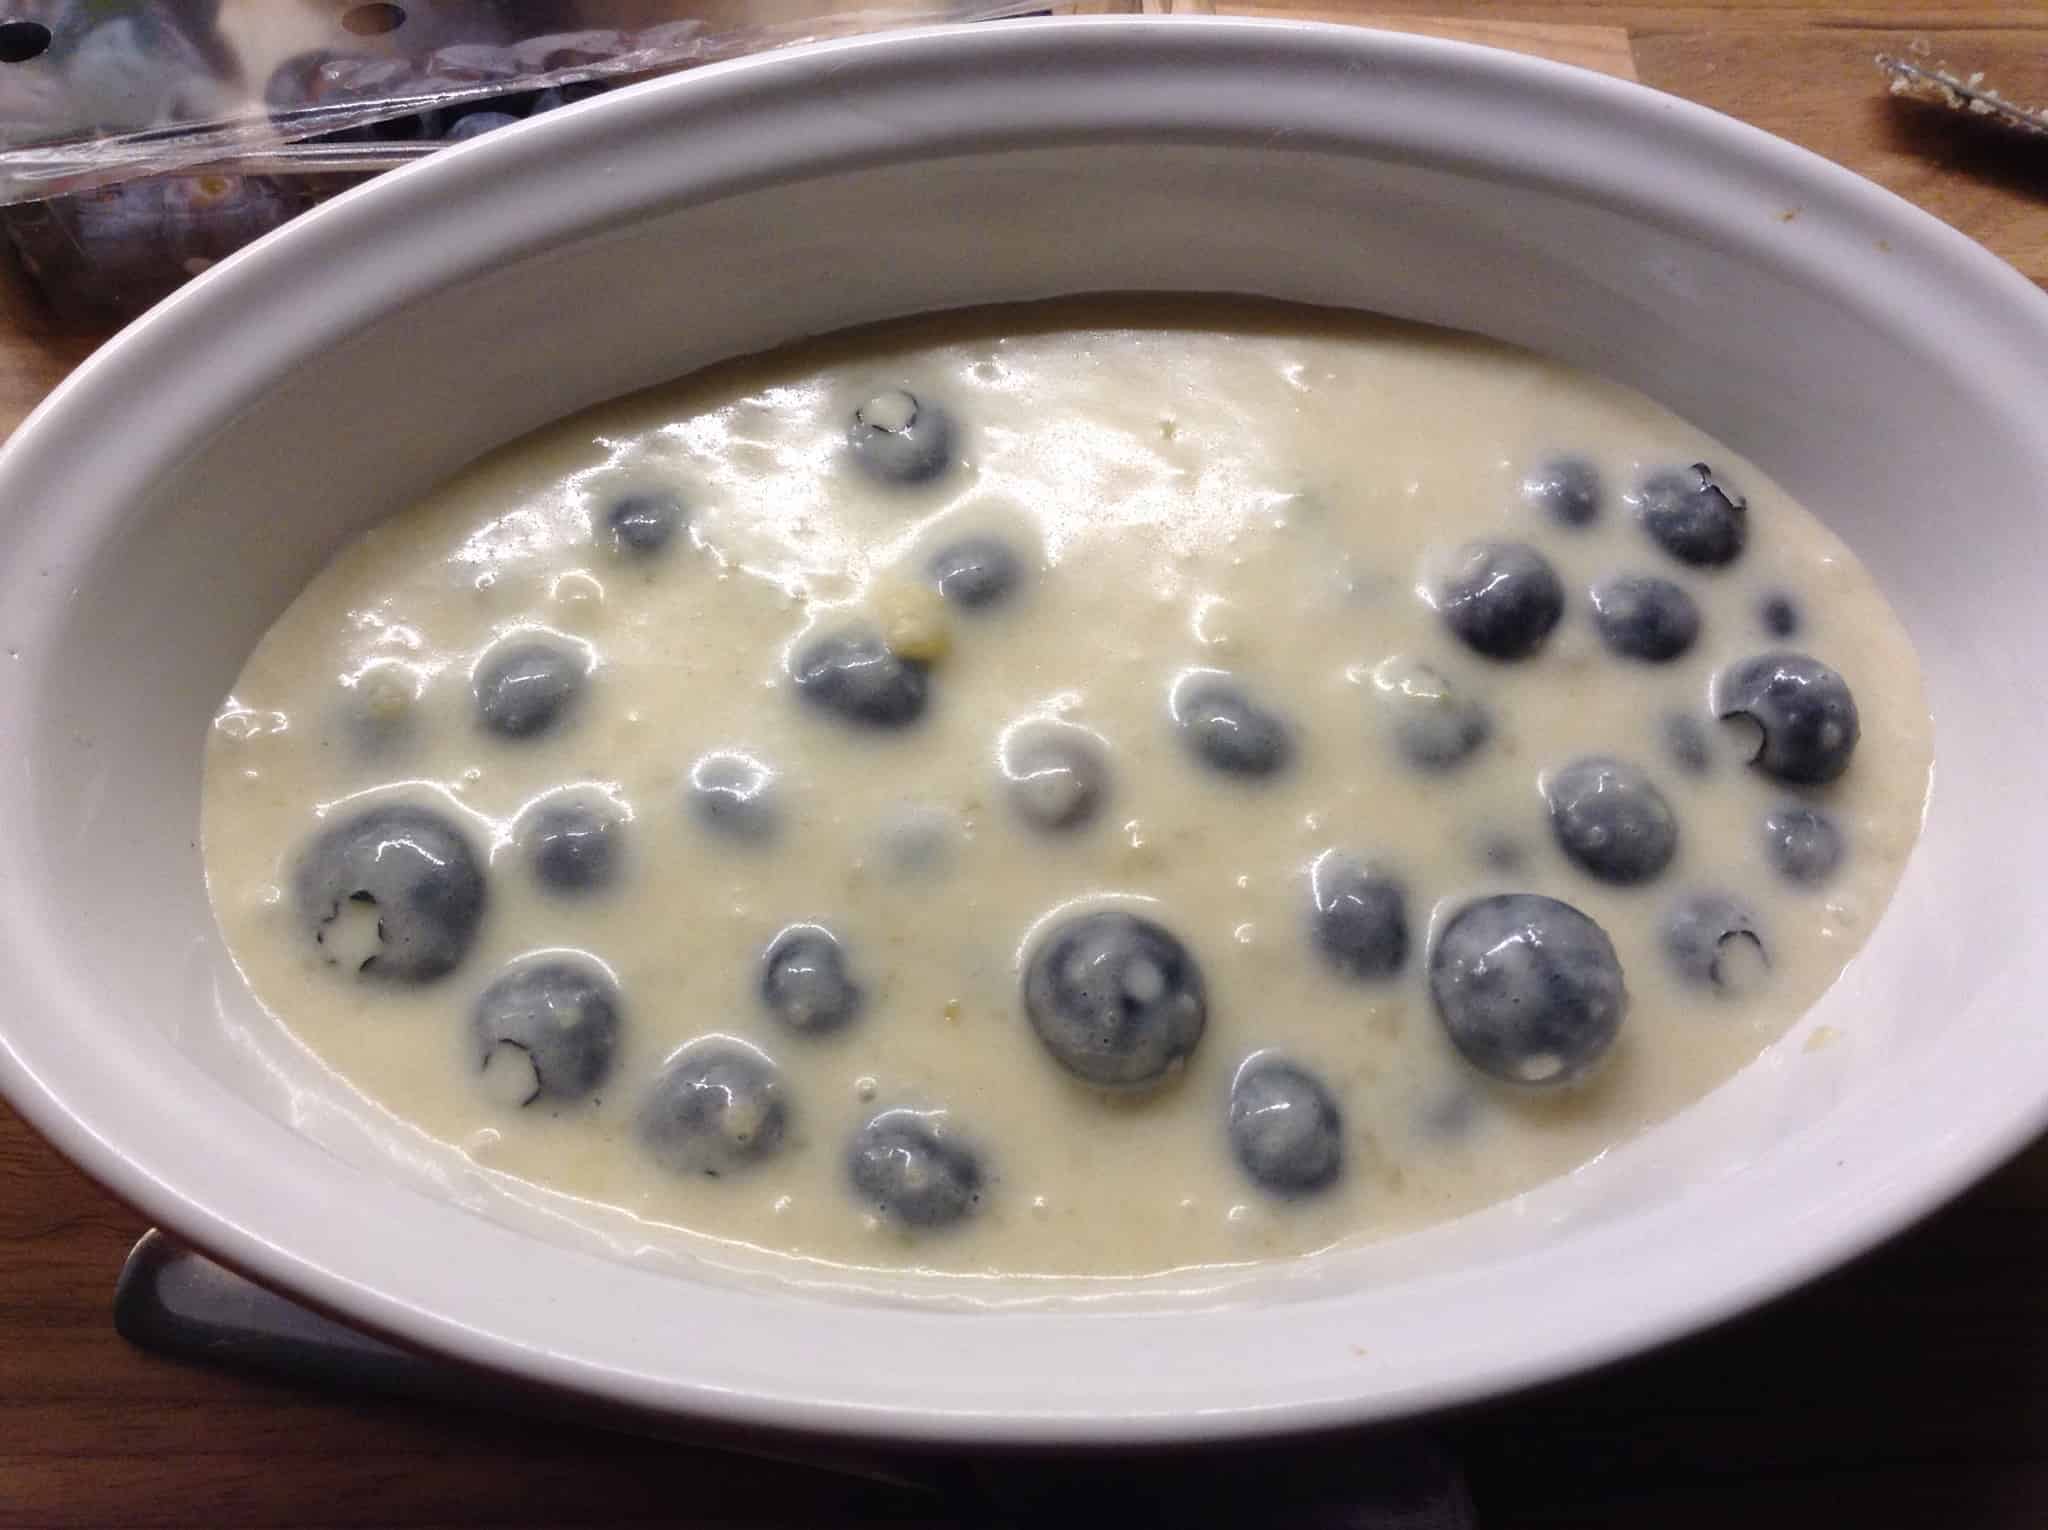 Sponge mixture with blueberries in oval dish.